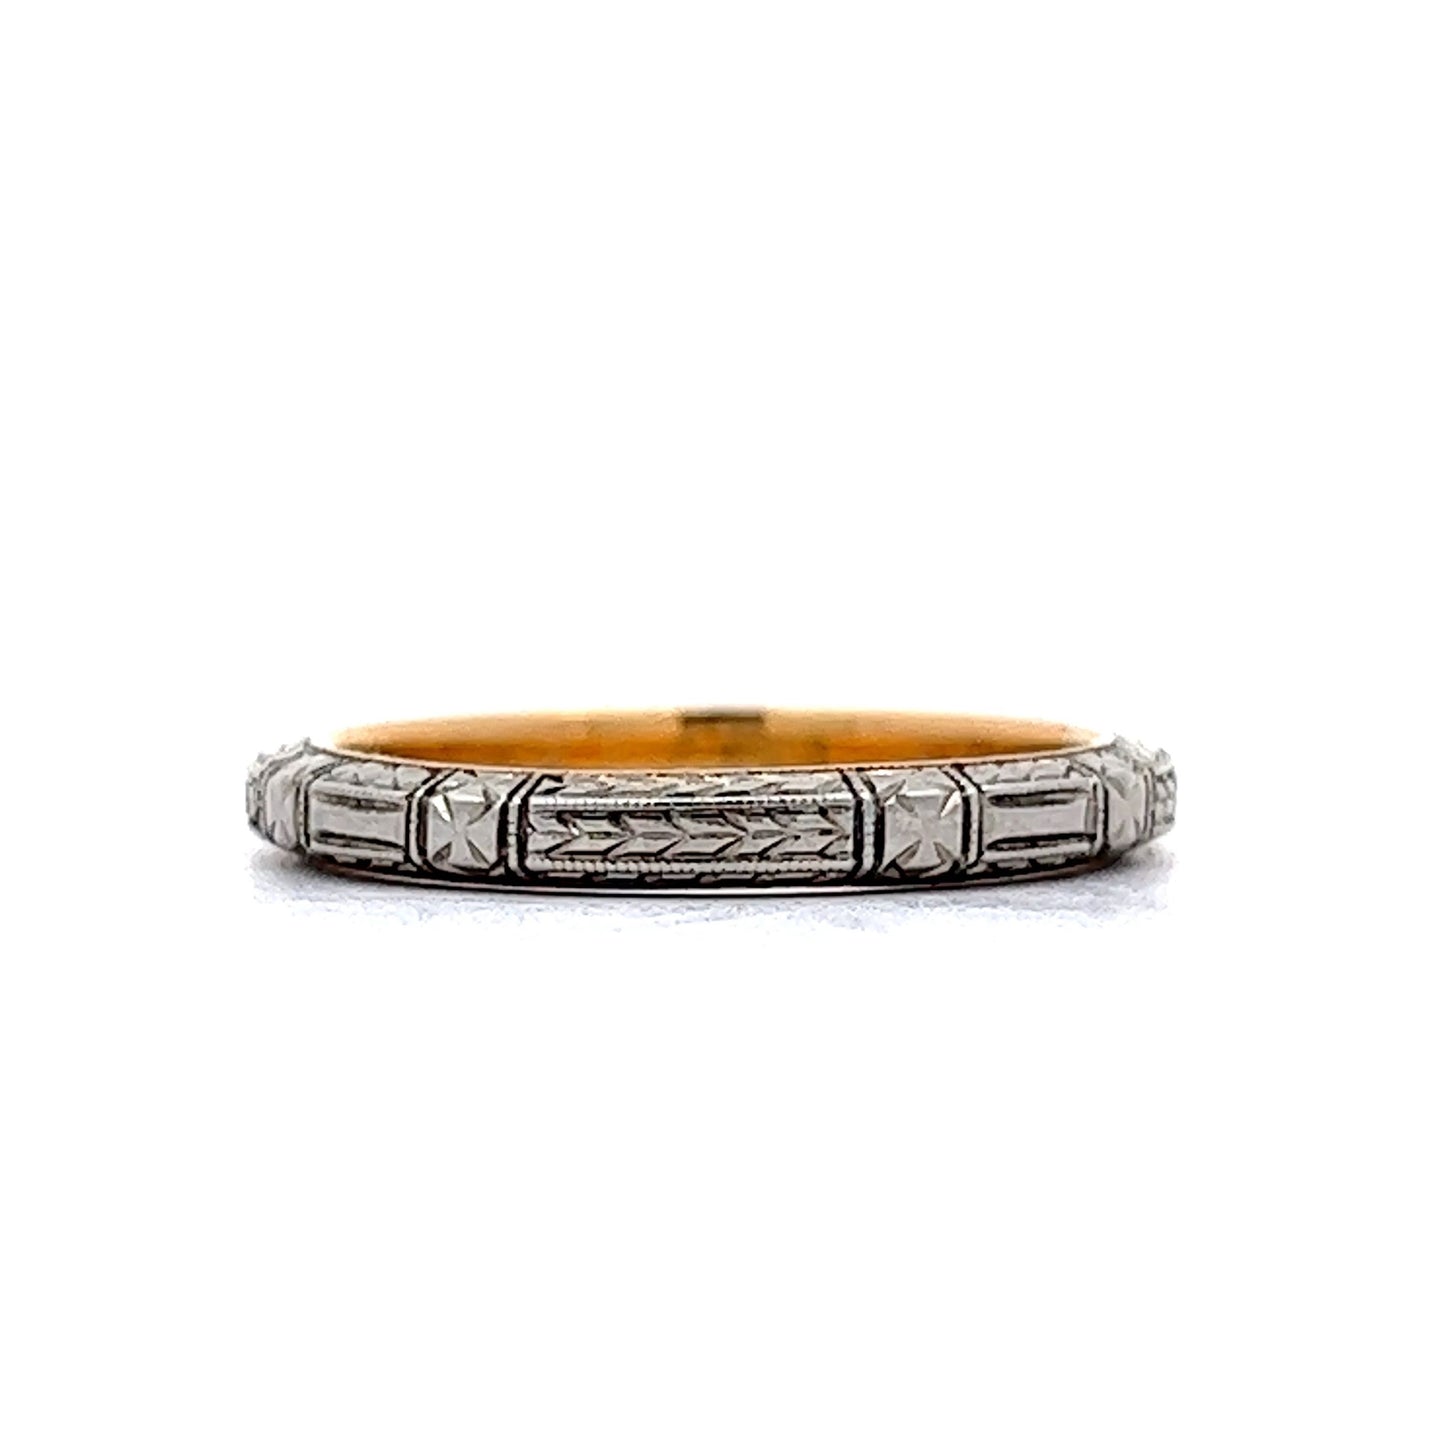 Engraved Two-Tone Art Deco Wedding Band in 18k